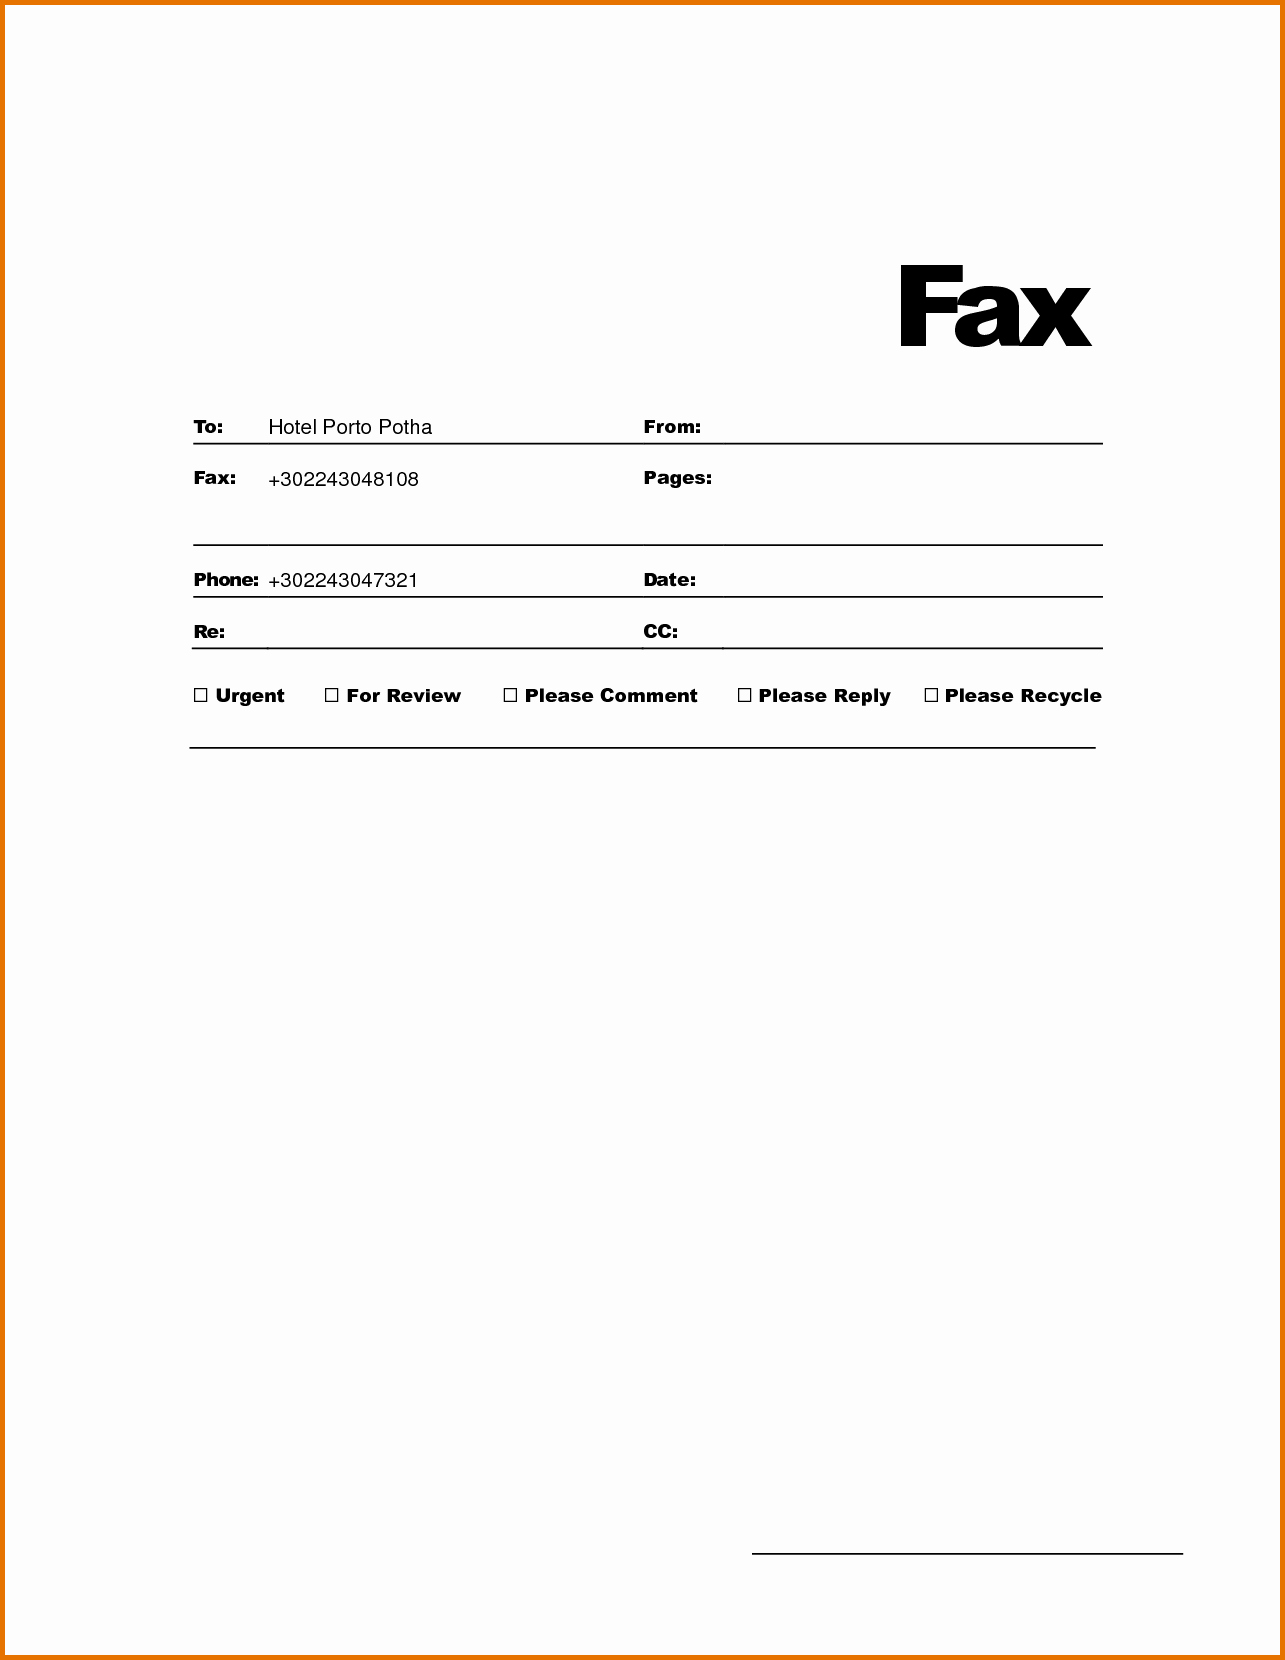 Cover Sheet for A Fax Awesome Fax Cover Sheet Word Template Image Collections Template